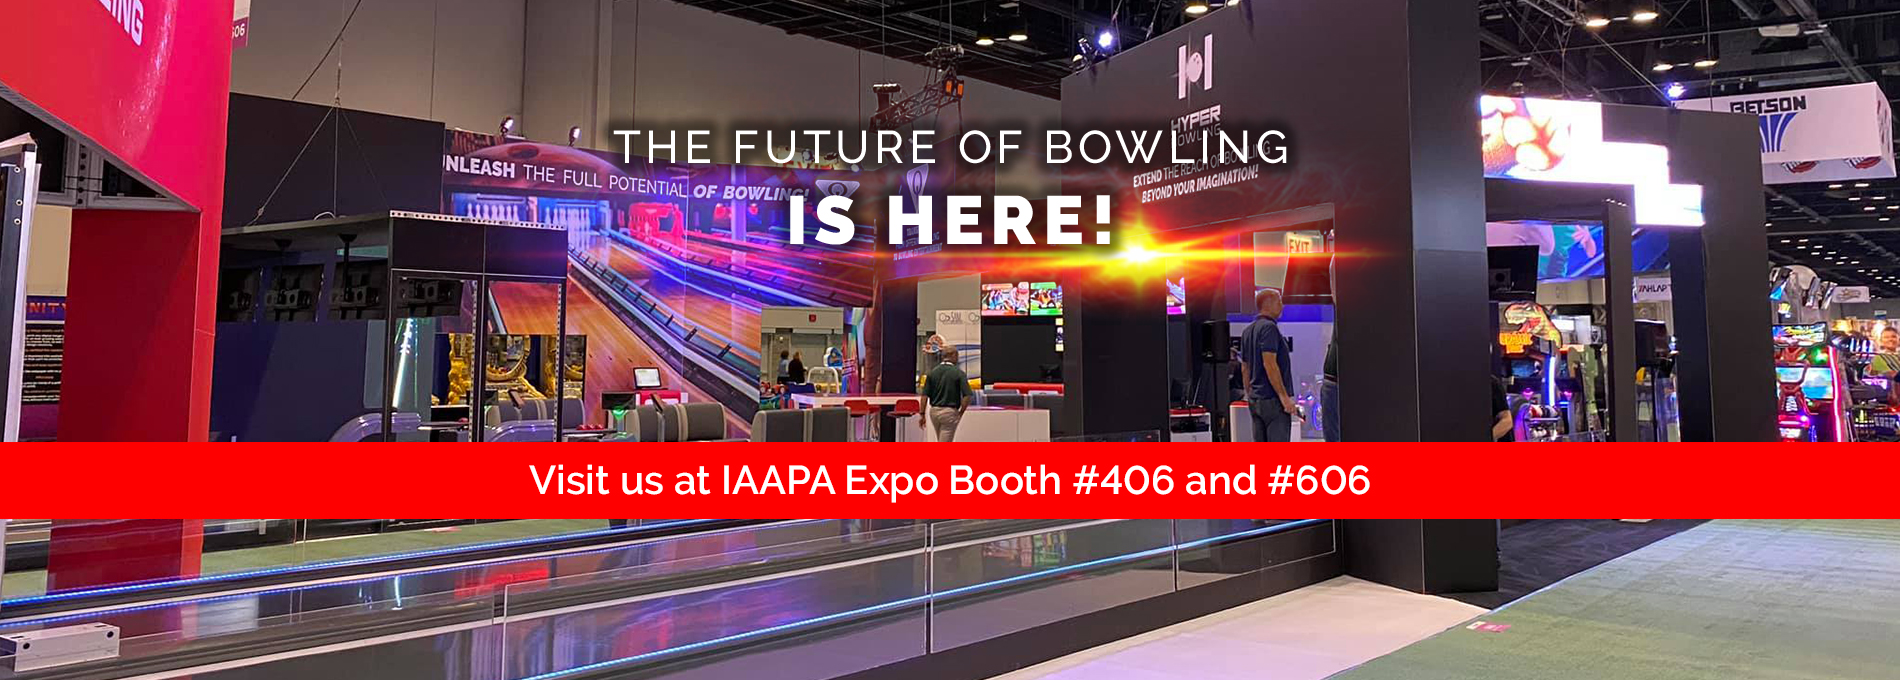 QubicaAMF bowling IAAPA Expo booth 2019